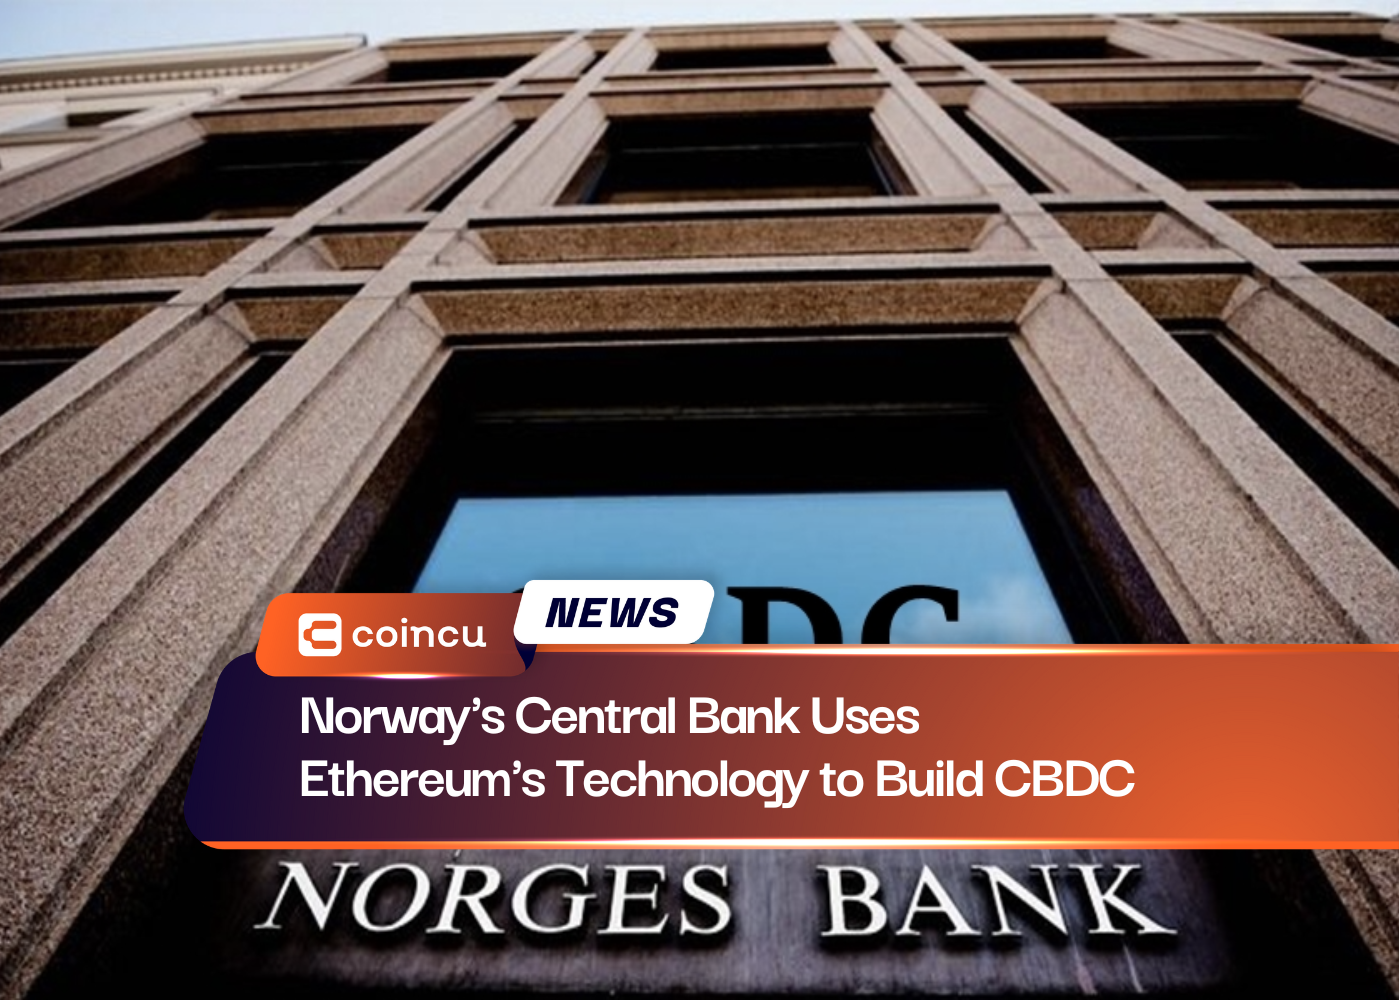 Norway's Central Bank Uses Ethereum's Technology to Build CBDC